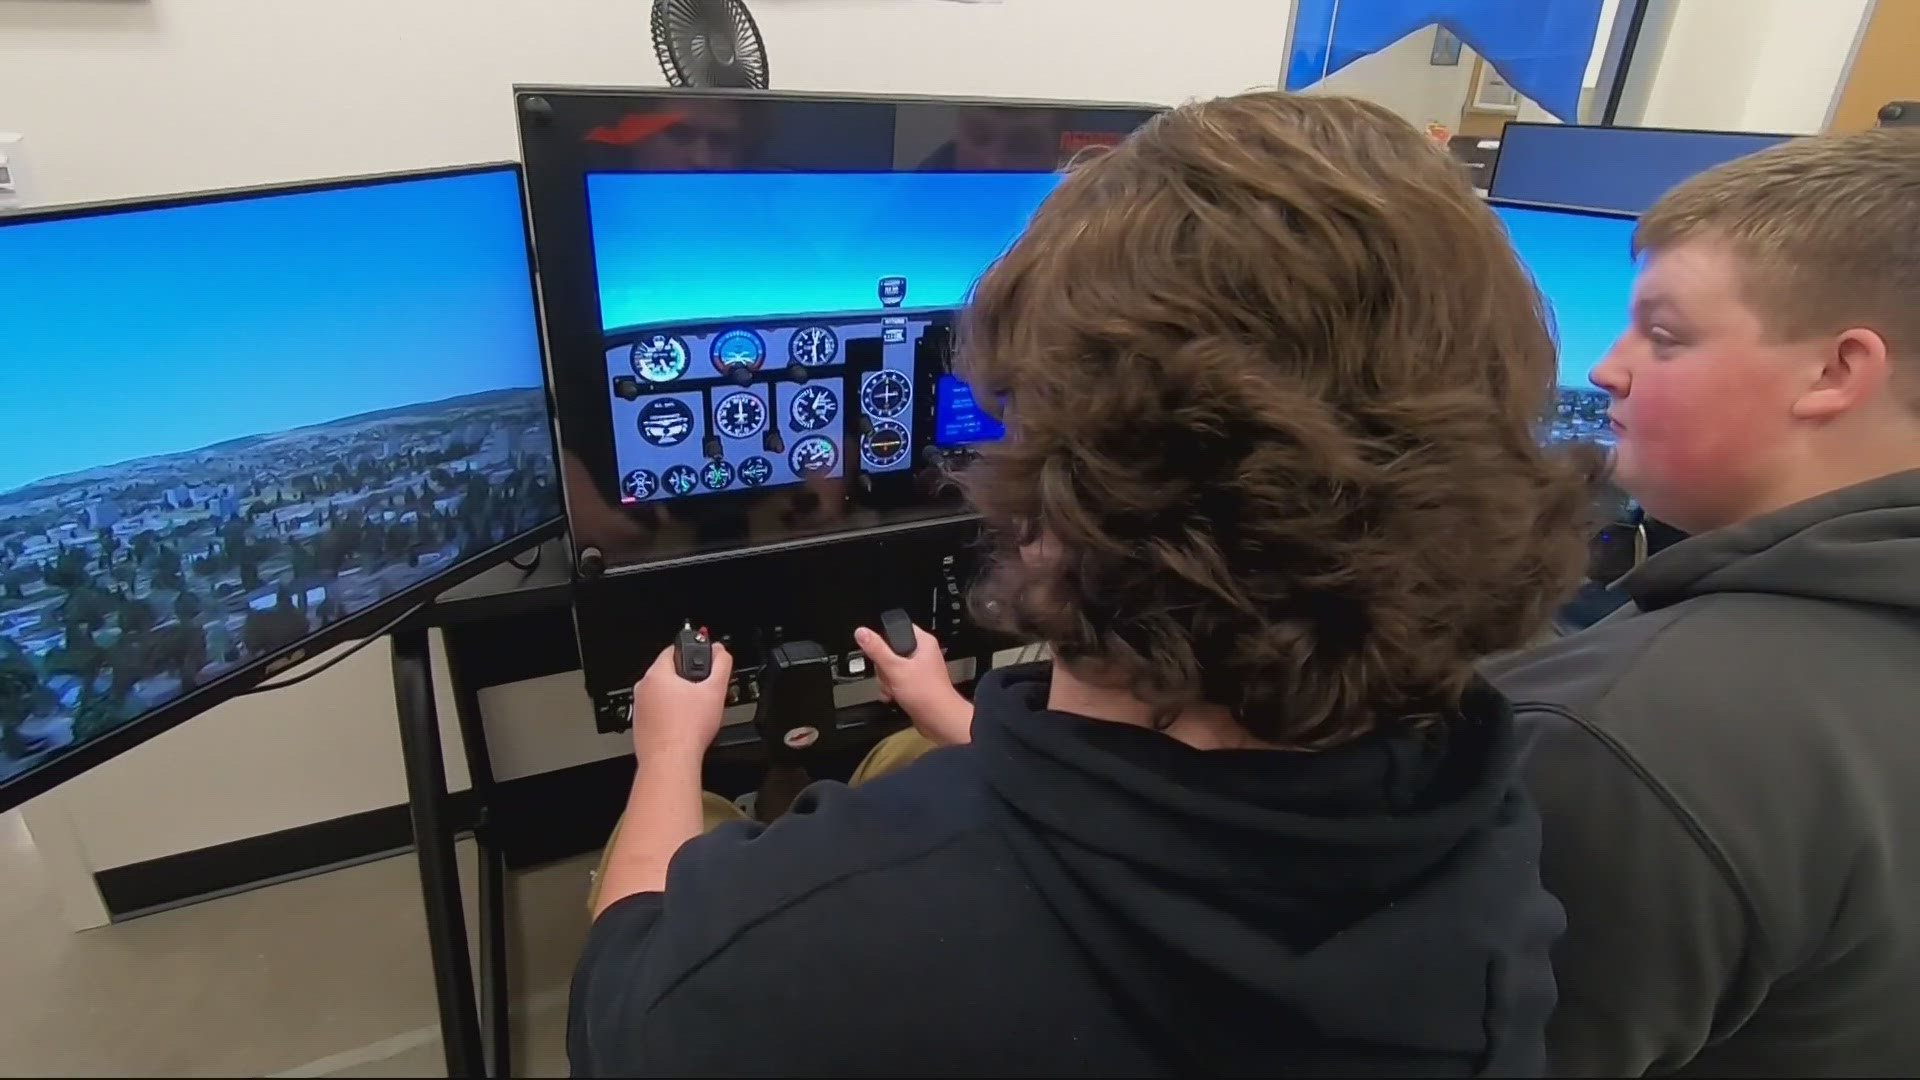 Two new programs in the school district this year teach students about aviation and behavioral health. Both job fields are facing staff shortages.